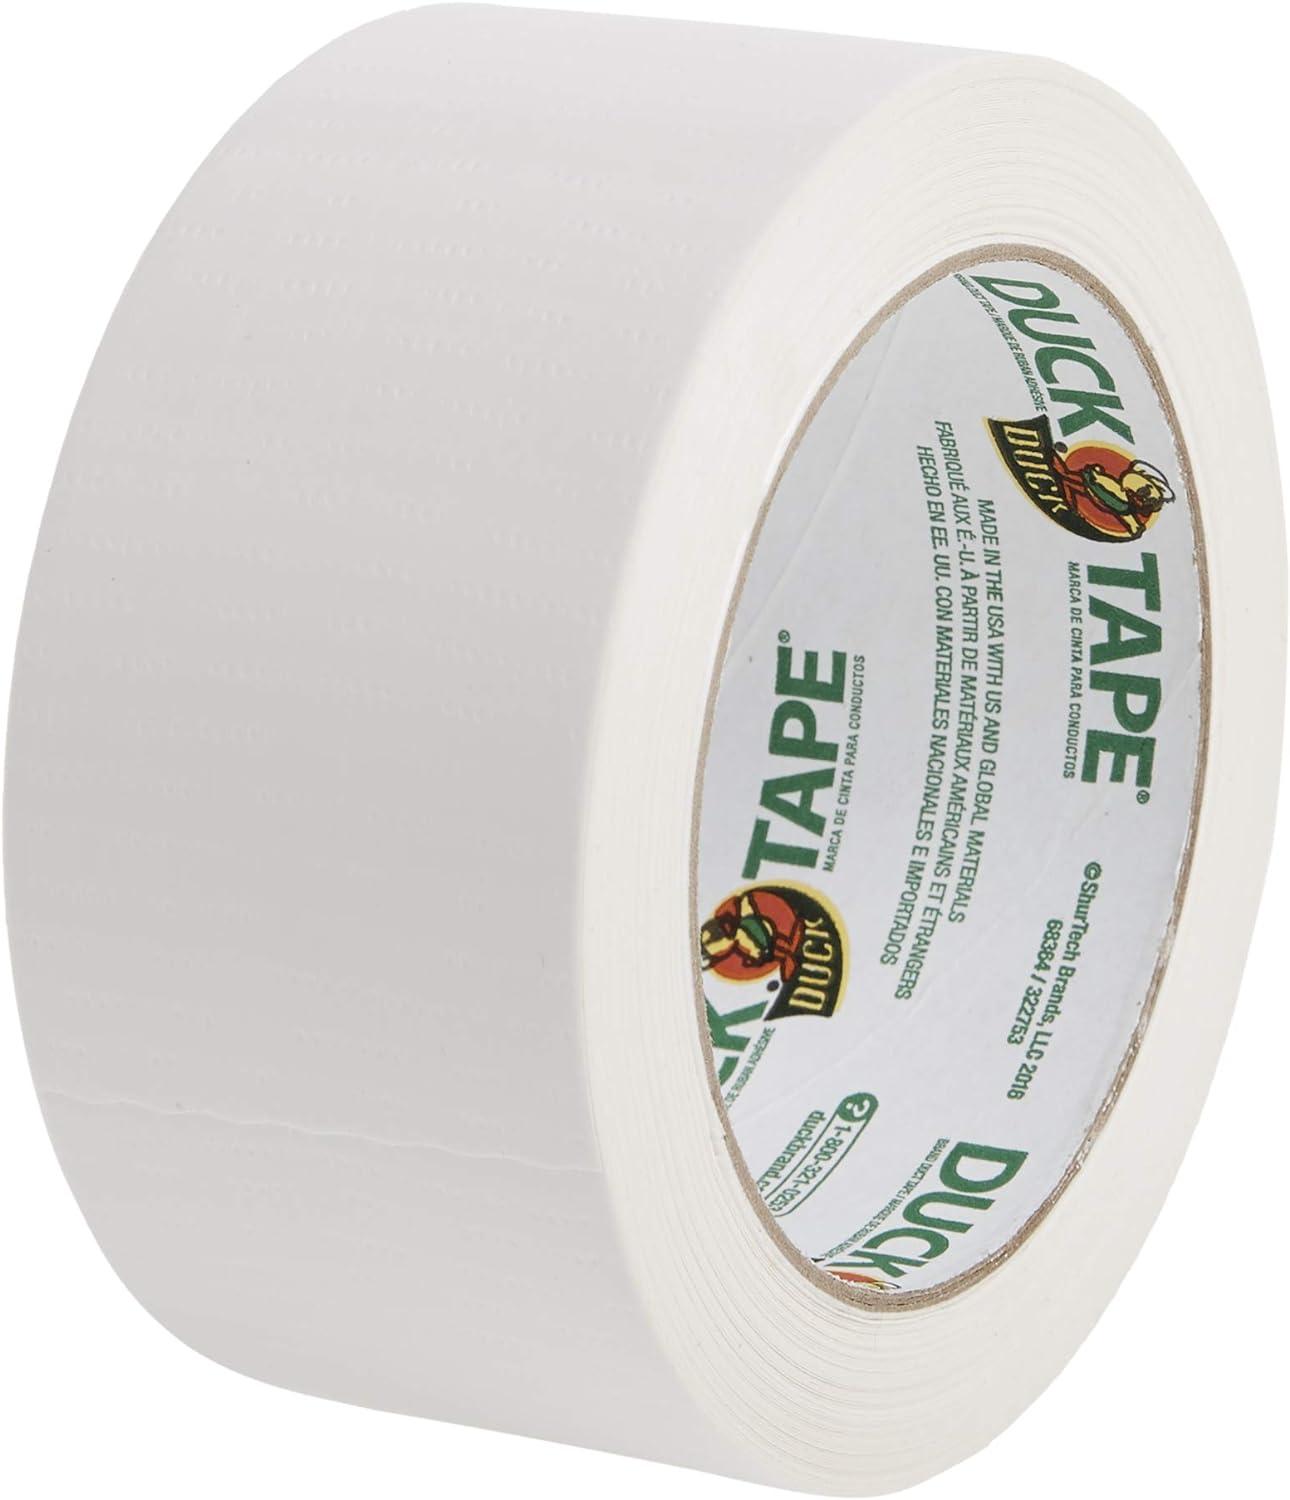 duck brand 1265015 color duct tape white 1 88 inches x 20 yards single roll  duck b002tol3zg